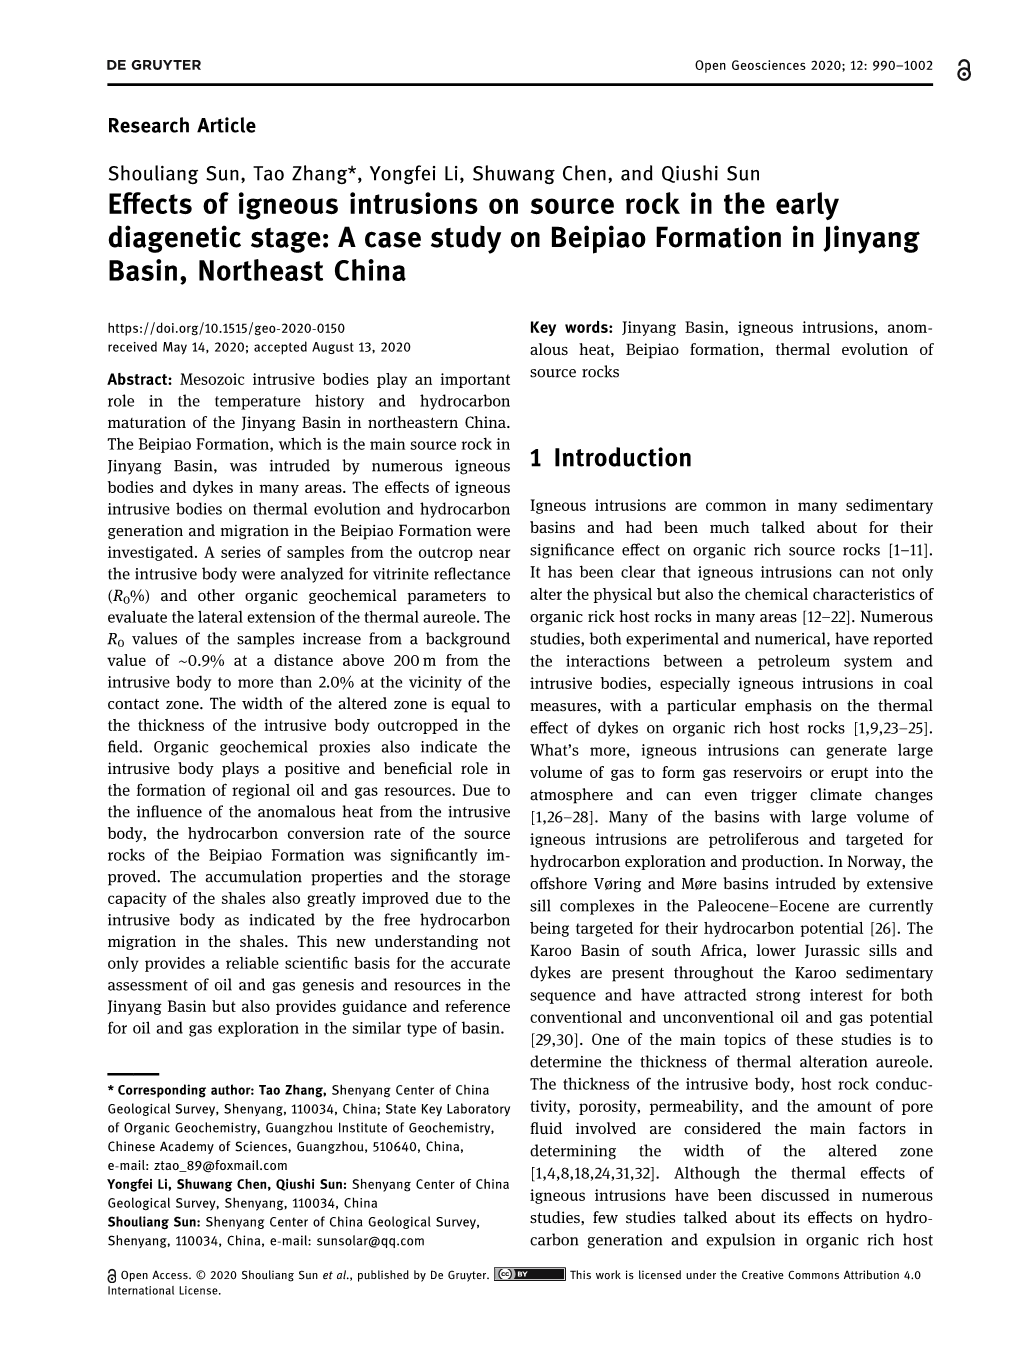 Effects of Igneous Intrusions on Source Rock in the Early Diagenetic Stage: a Case Study on Beipiao Formation in Jinyang Basin, Northeast China